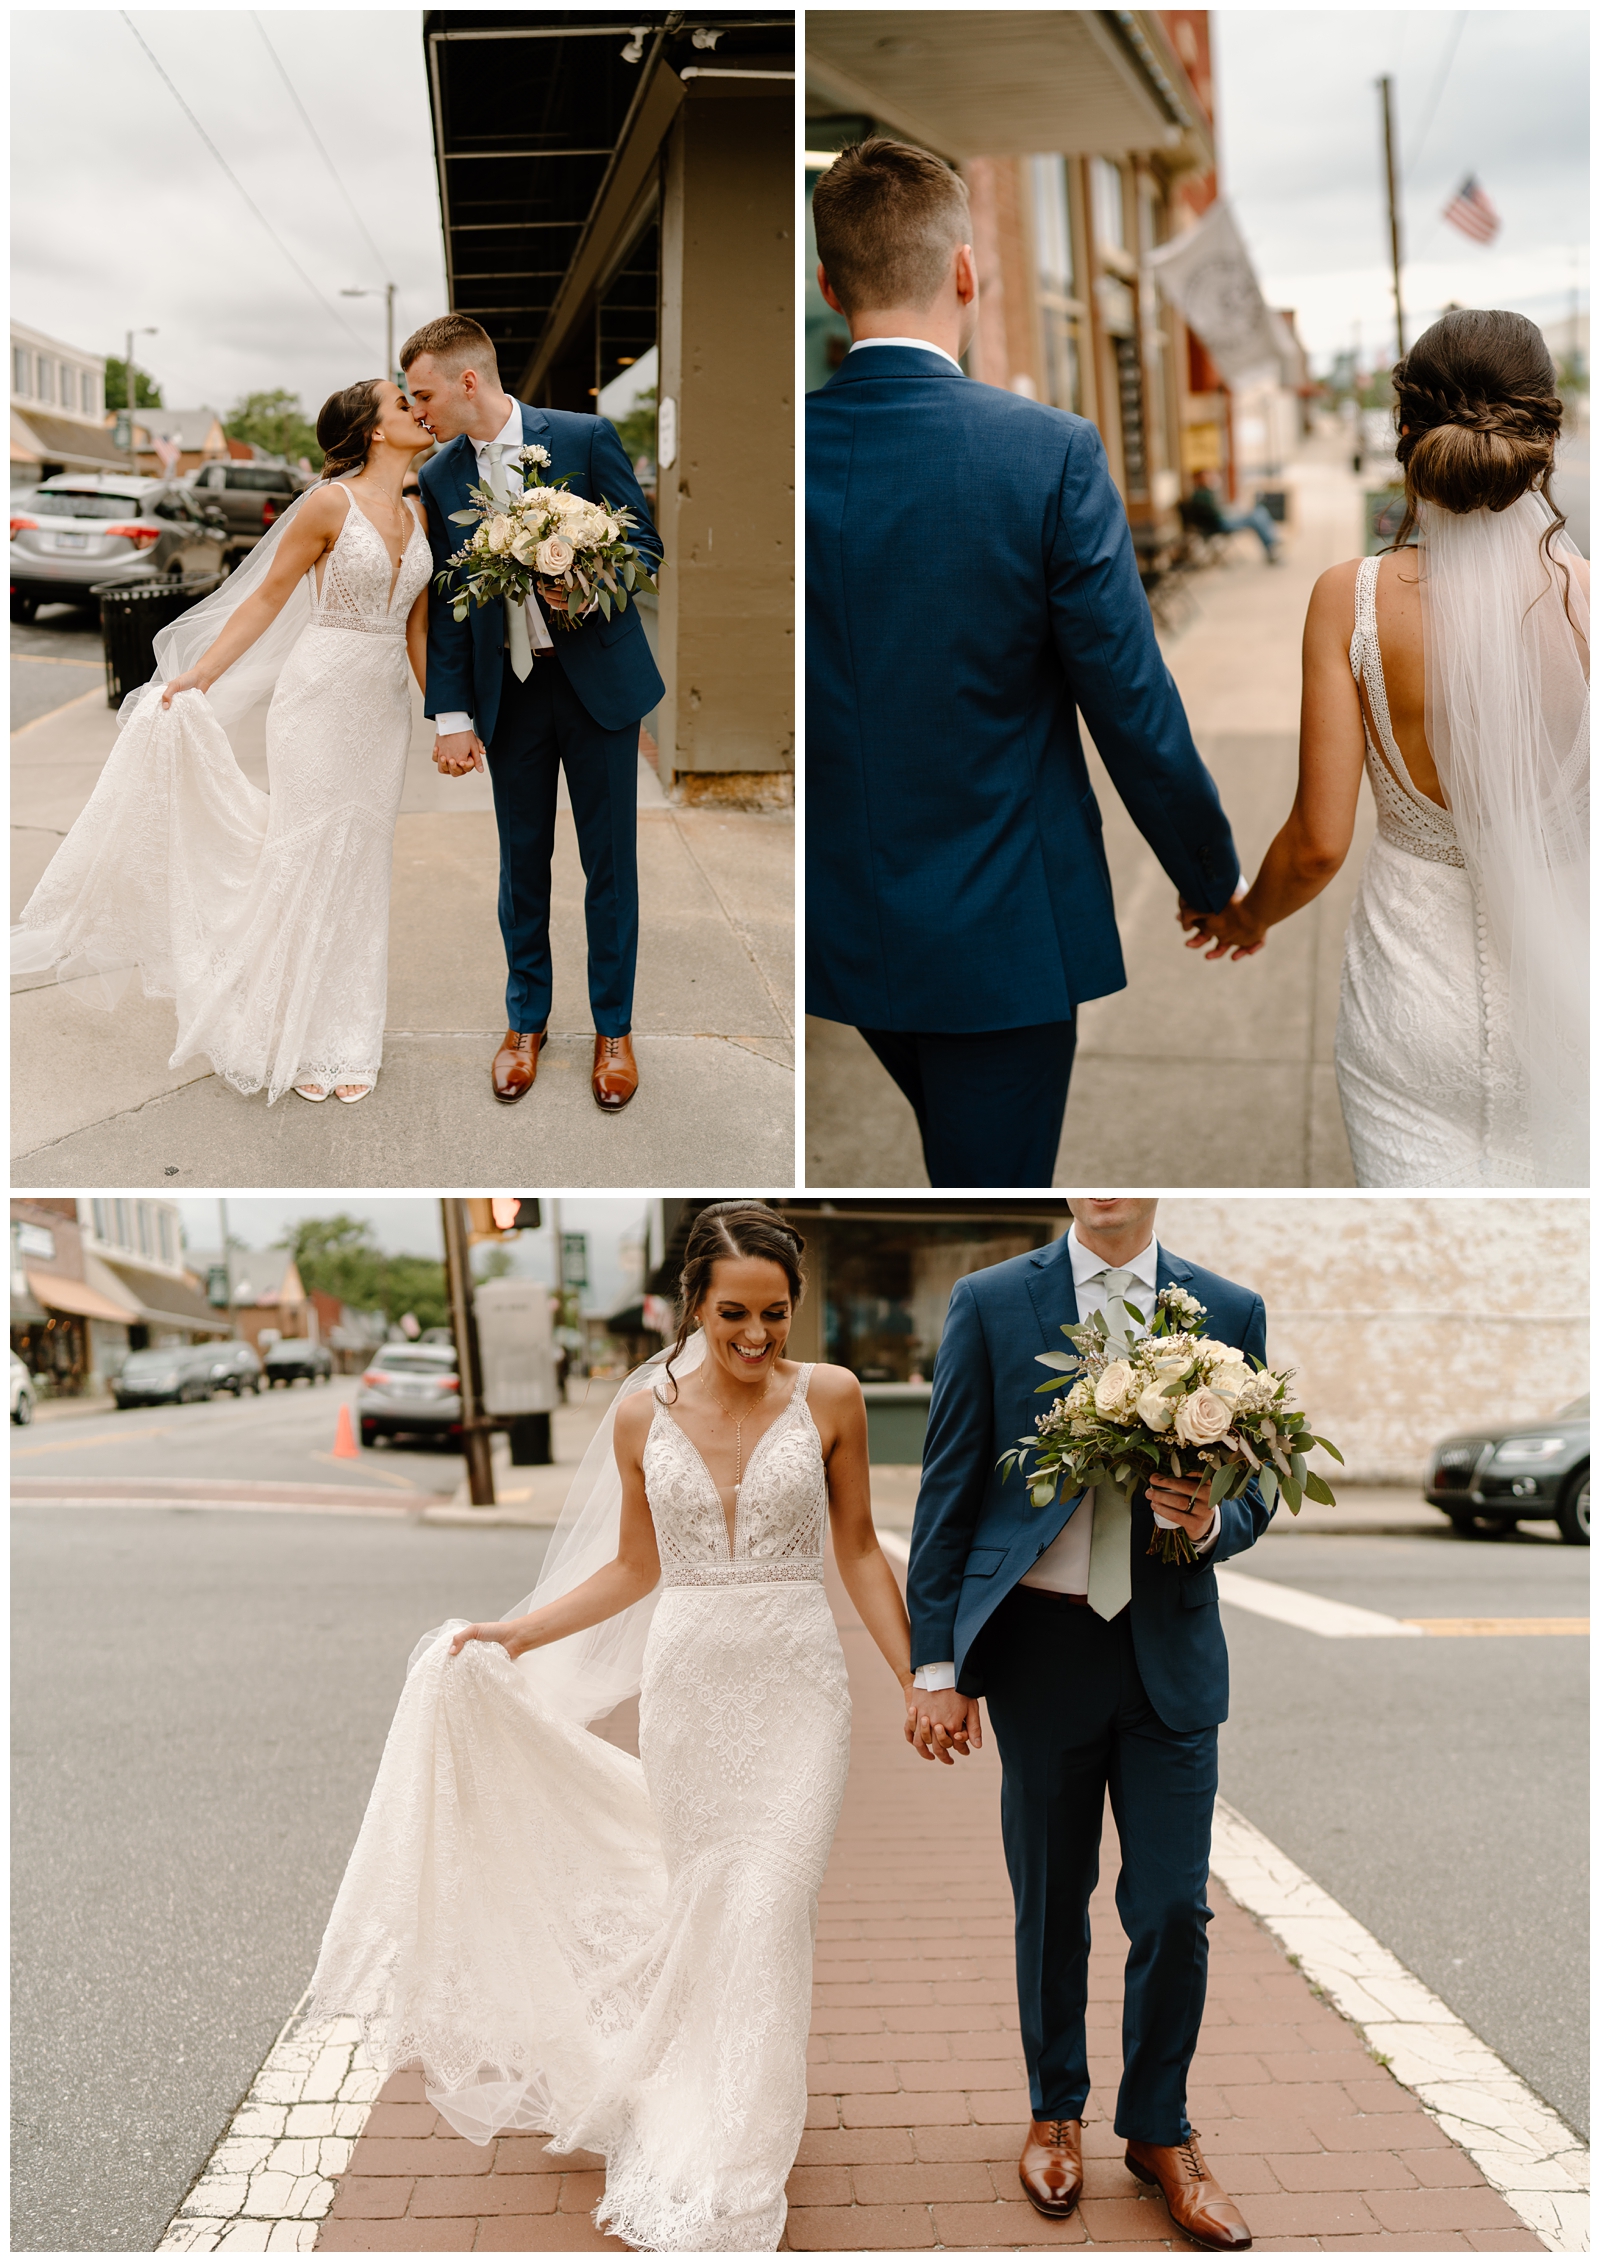 Stunning rainy day wedding portraits, bride wearing lace fitted mermaid style dress, groom wearing blue suit, NC wedding photographer